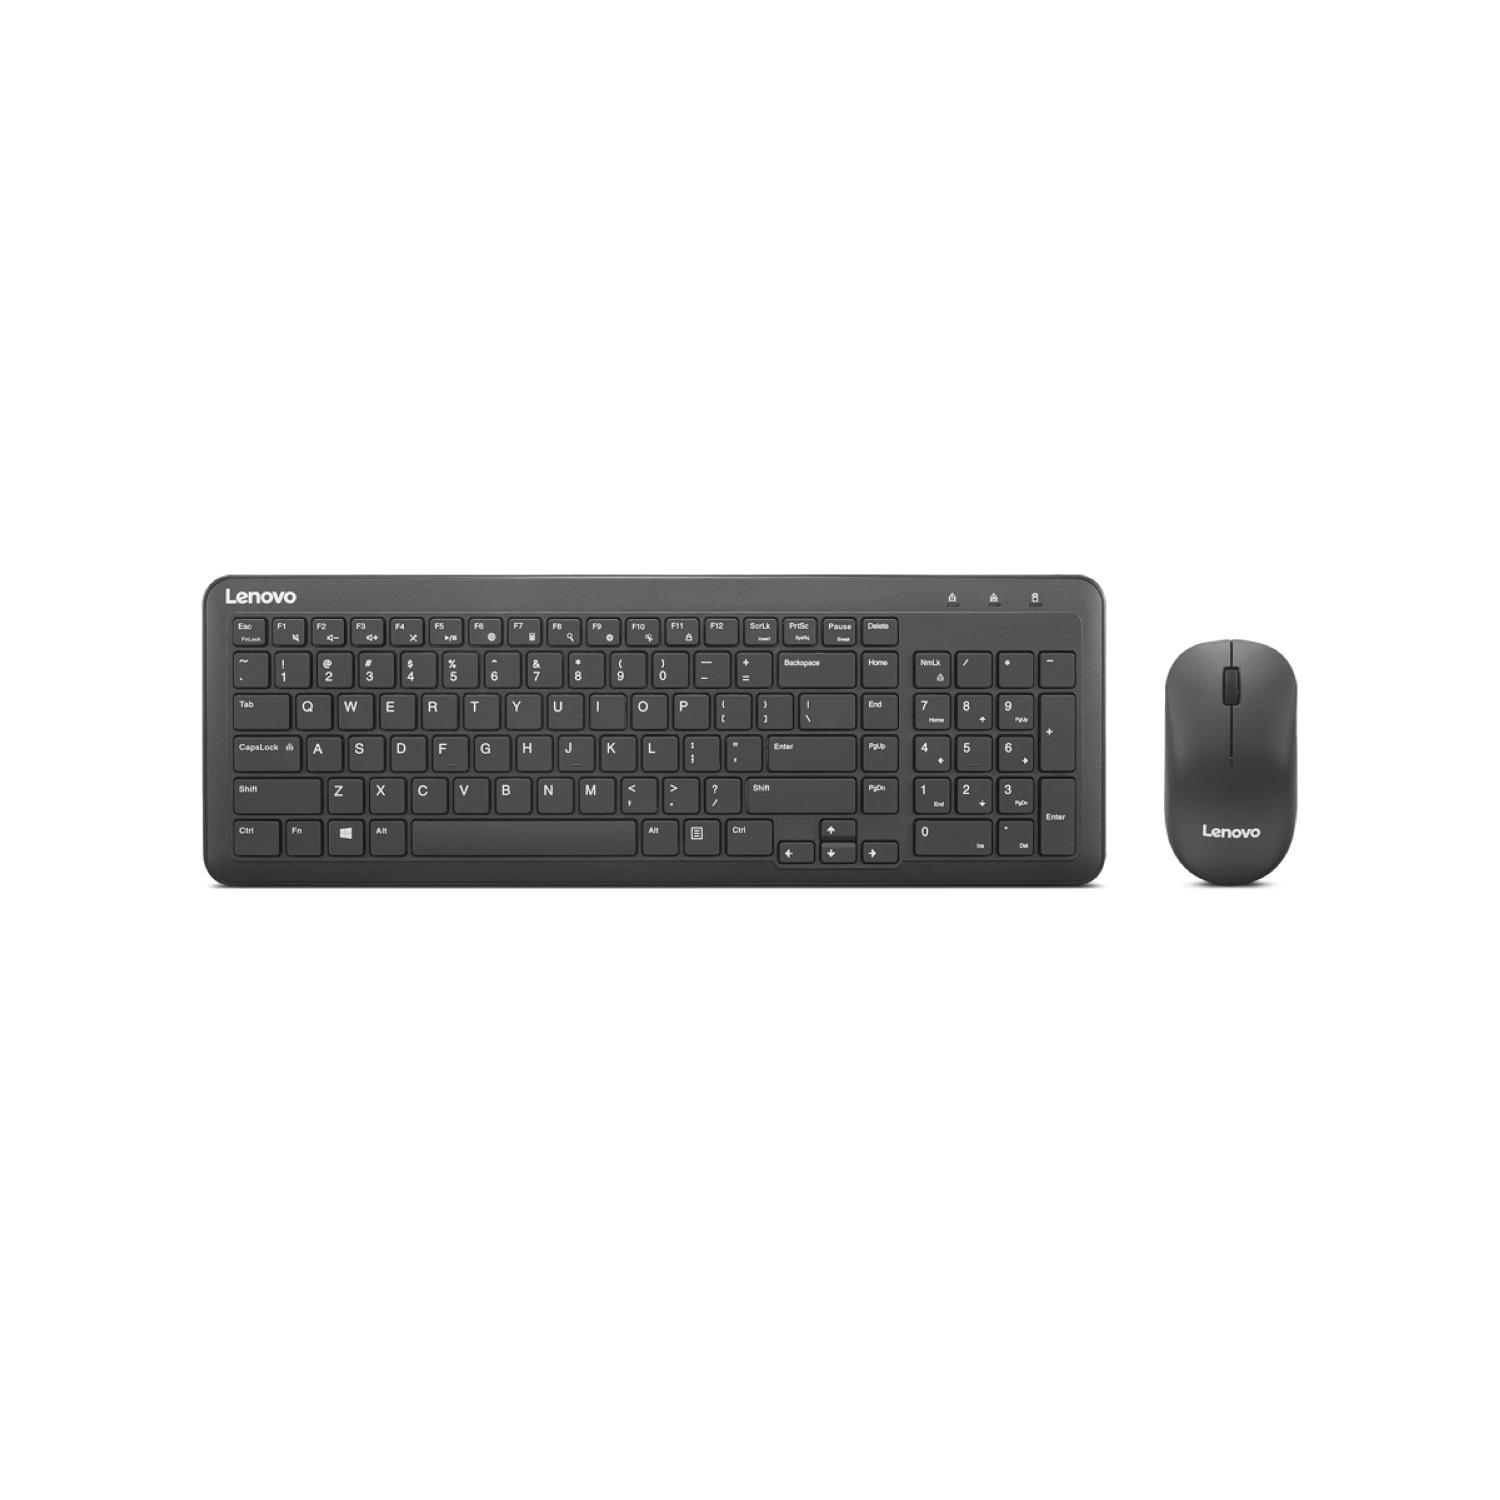 Lenovo 300 Wireless Keyboard and Mouse Combo - Computers